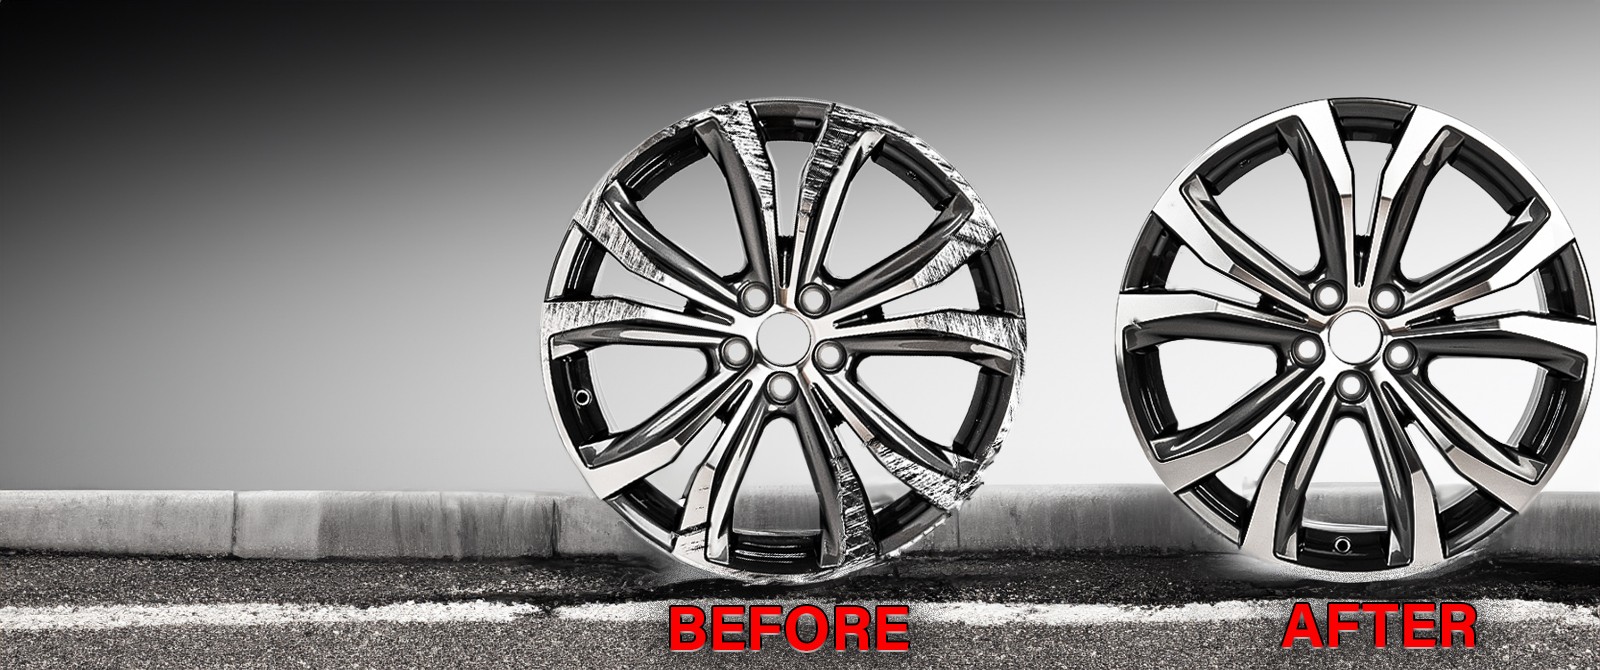 AWT can make your wheels look like new!